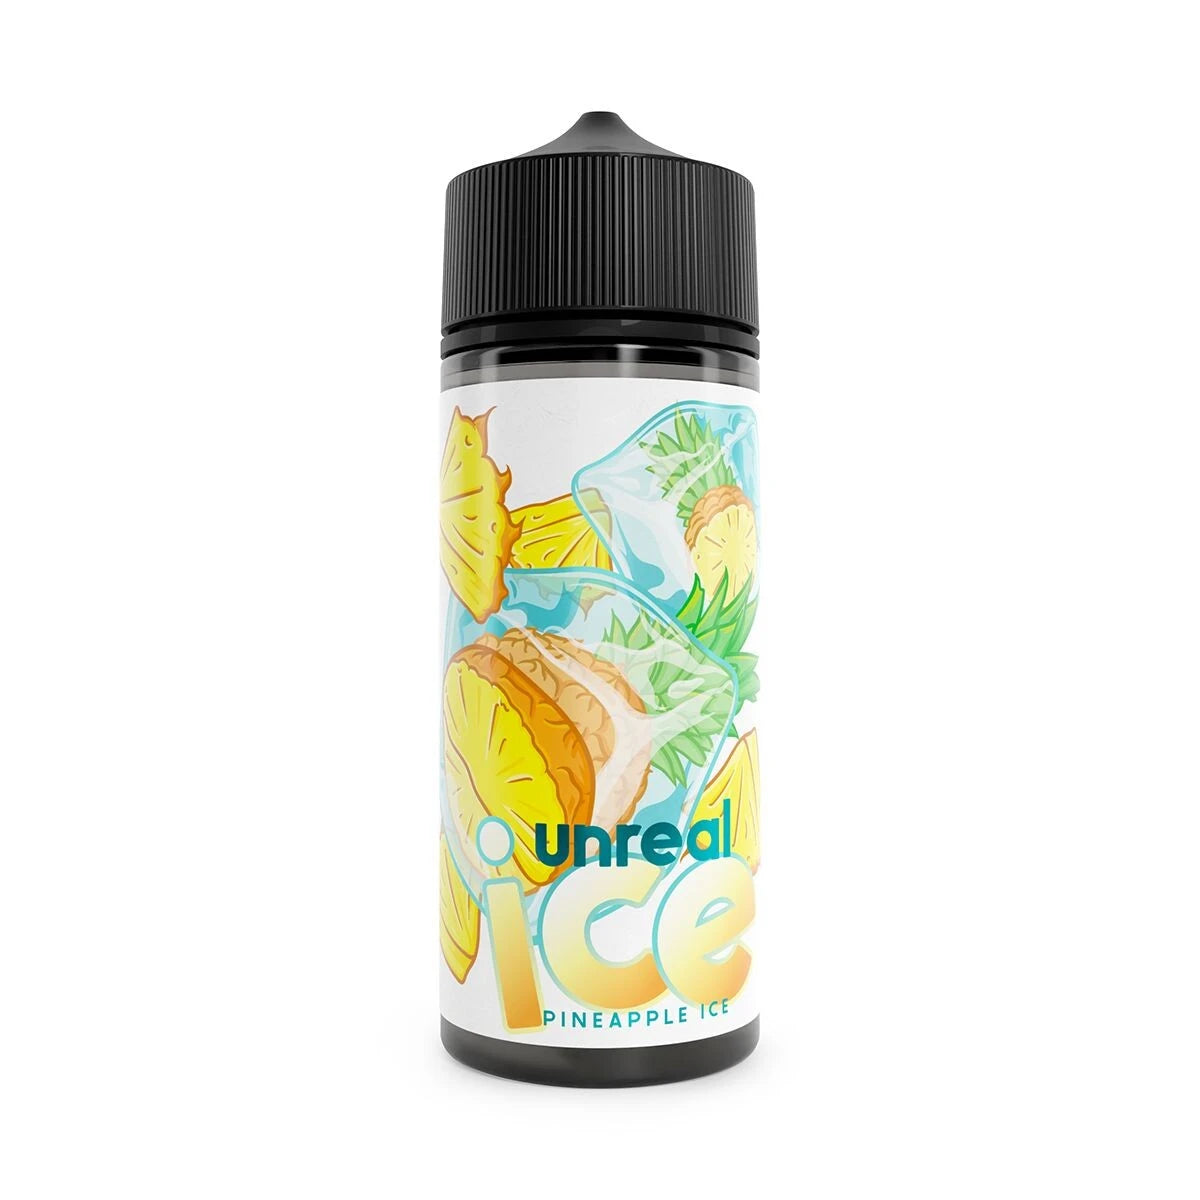 Pineapple Ice Shortfill by Unreal Ice. - 100ml